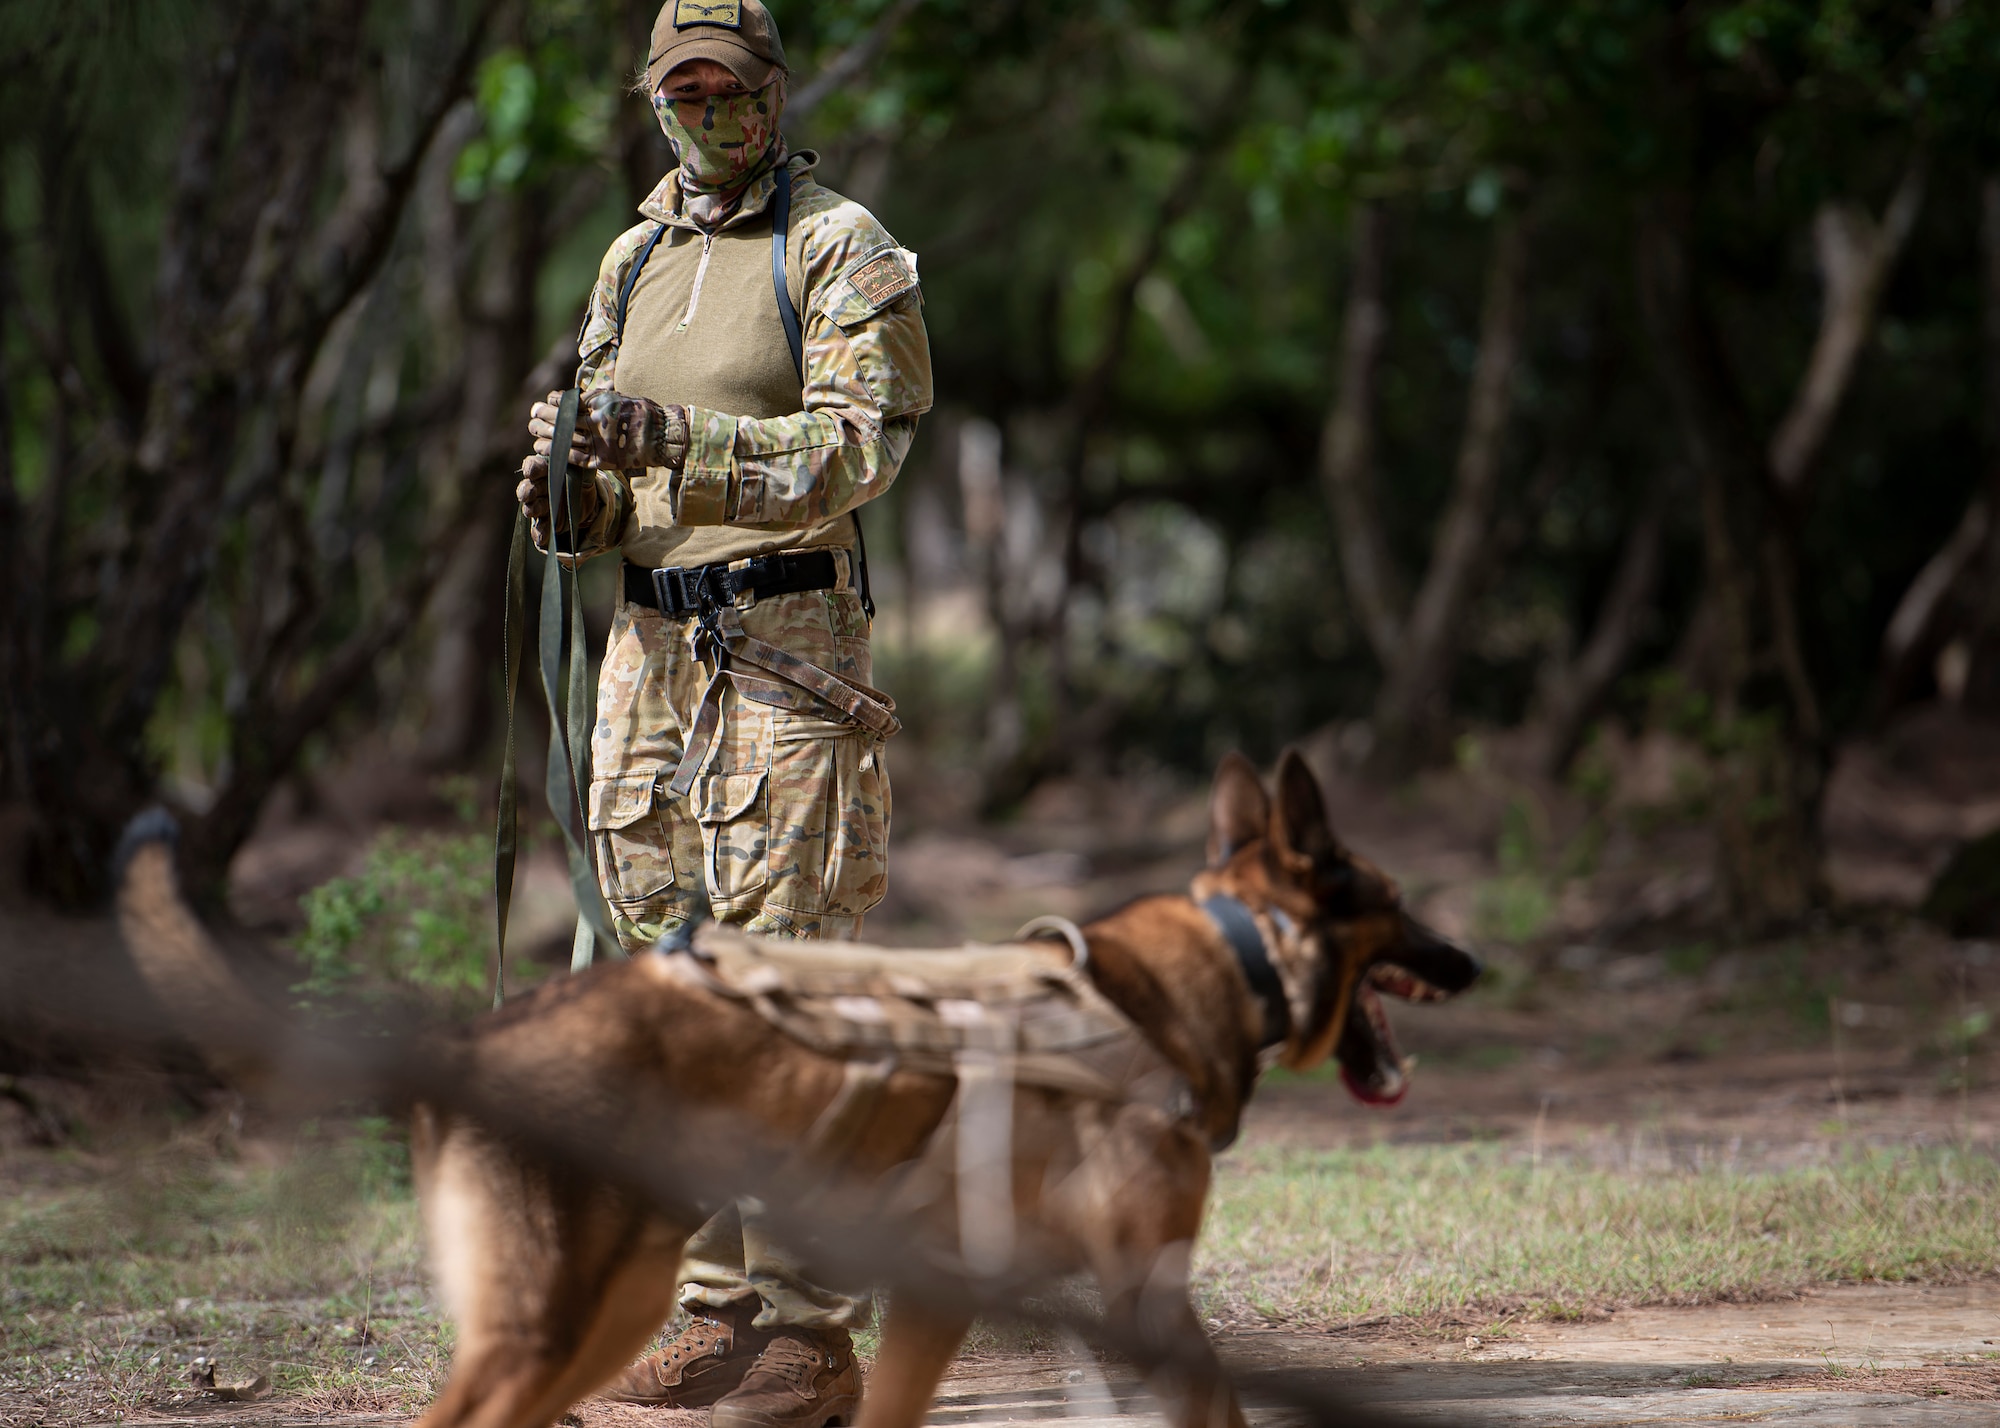 LACW Christina Smith, 2 Security Forces Squadron Tindal, Australia, military working dog handler, takes a momentary break with her dog during Pacific Defender 21-1 at Andersen Air Force Base, Guam, January 27 2021.